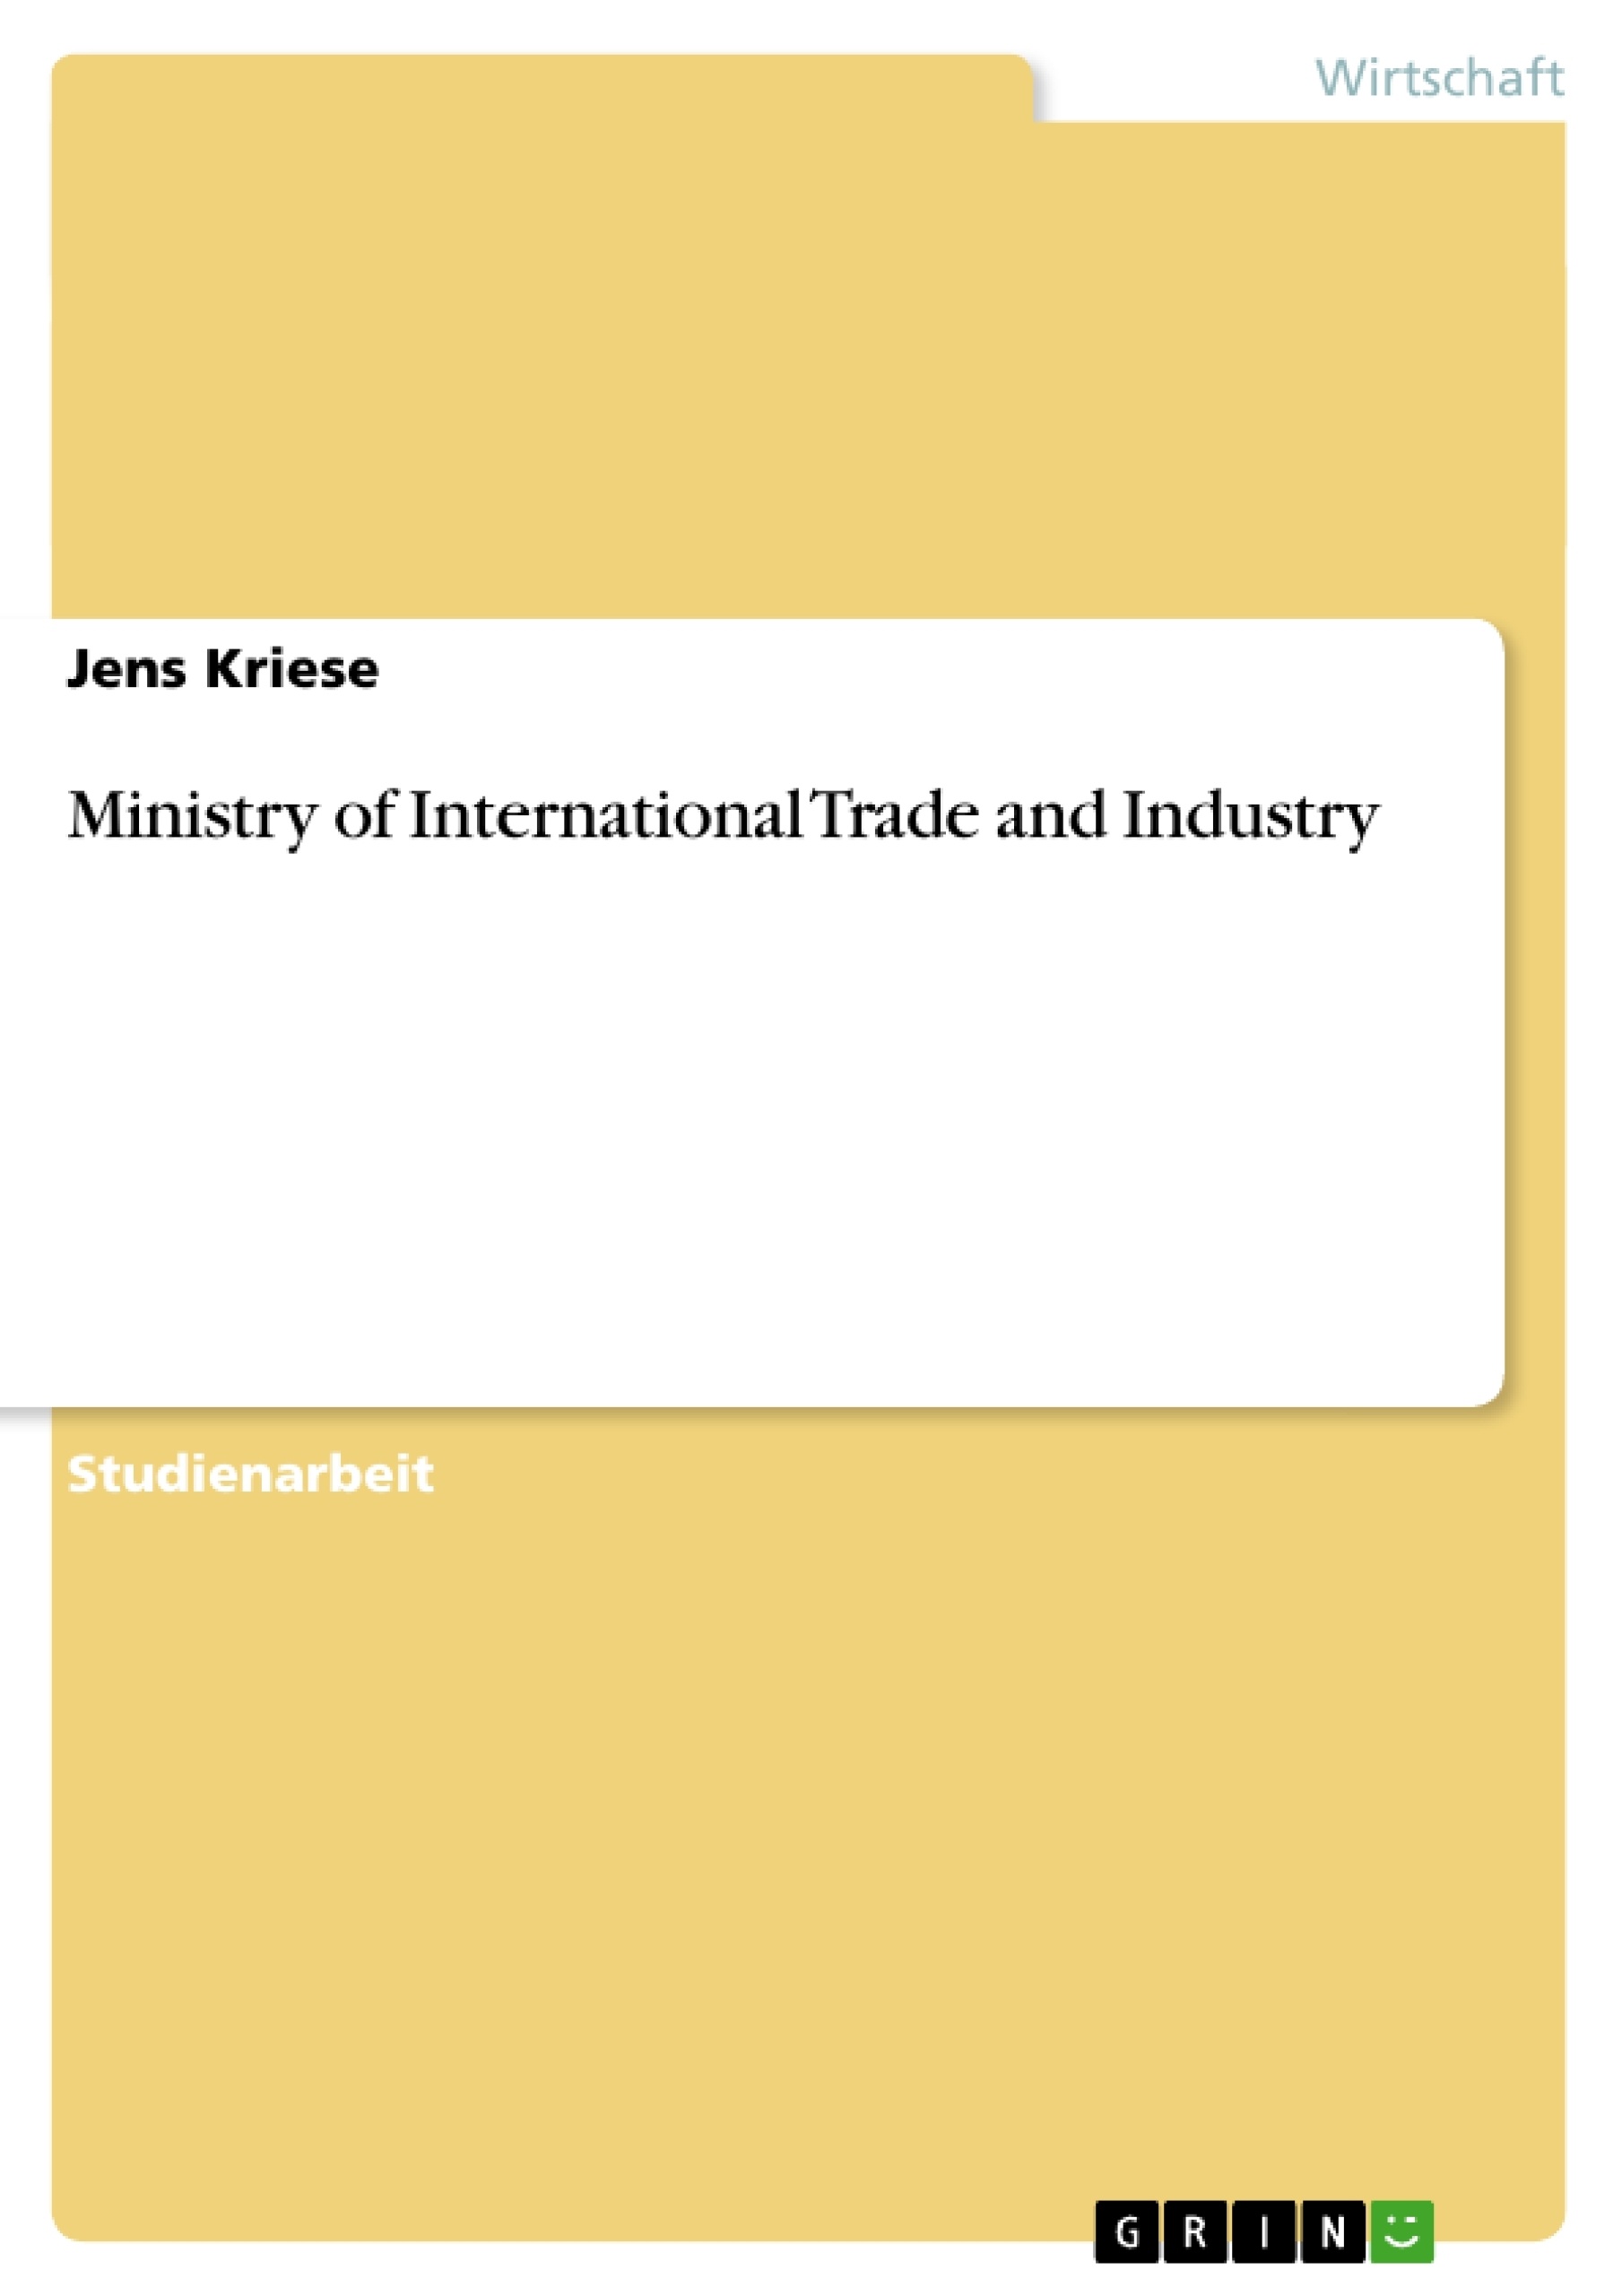 Titel: Ministry of International Trade and Industry